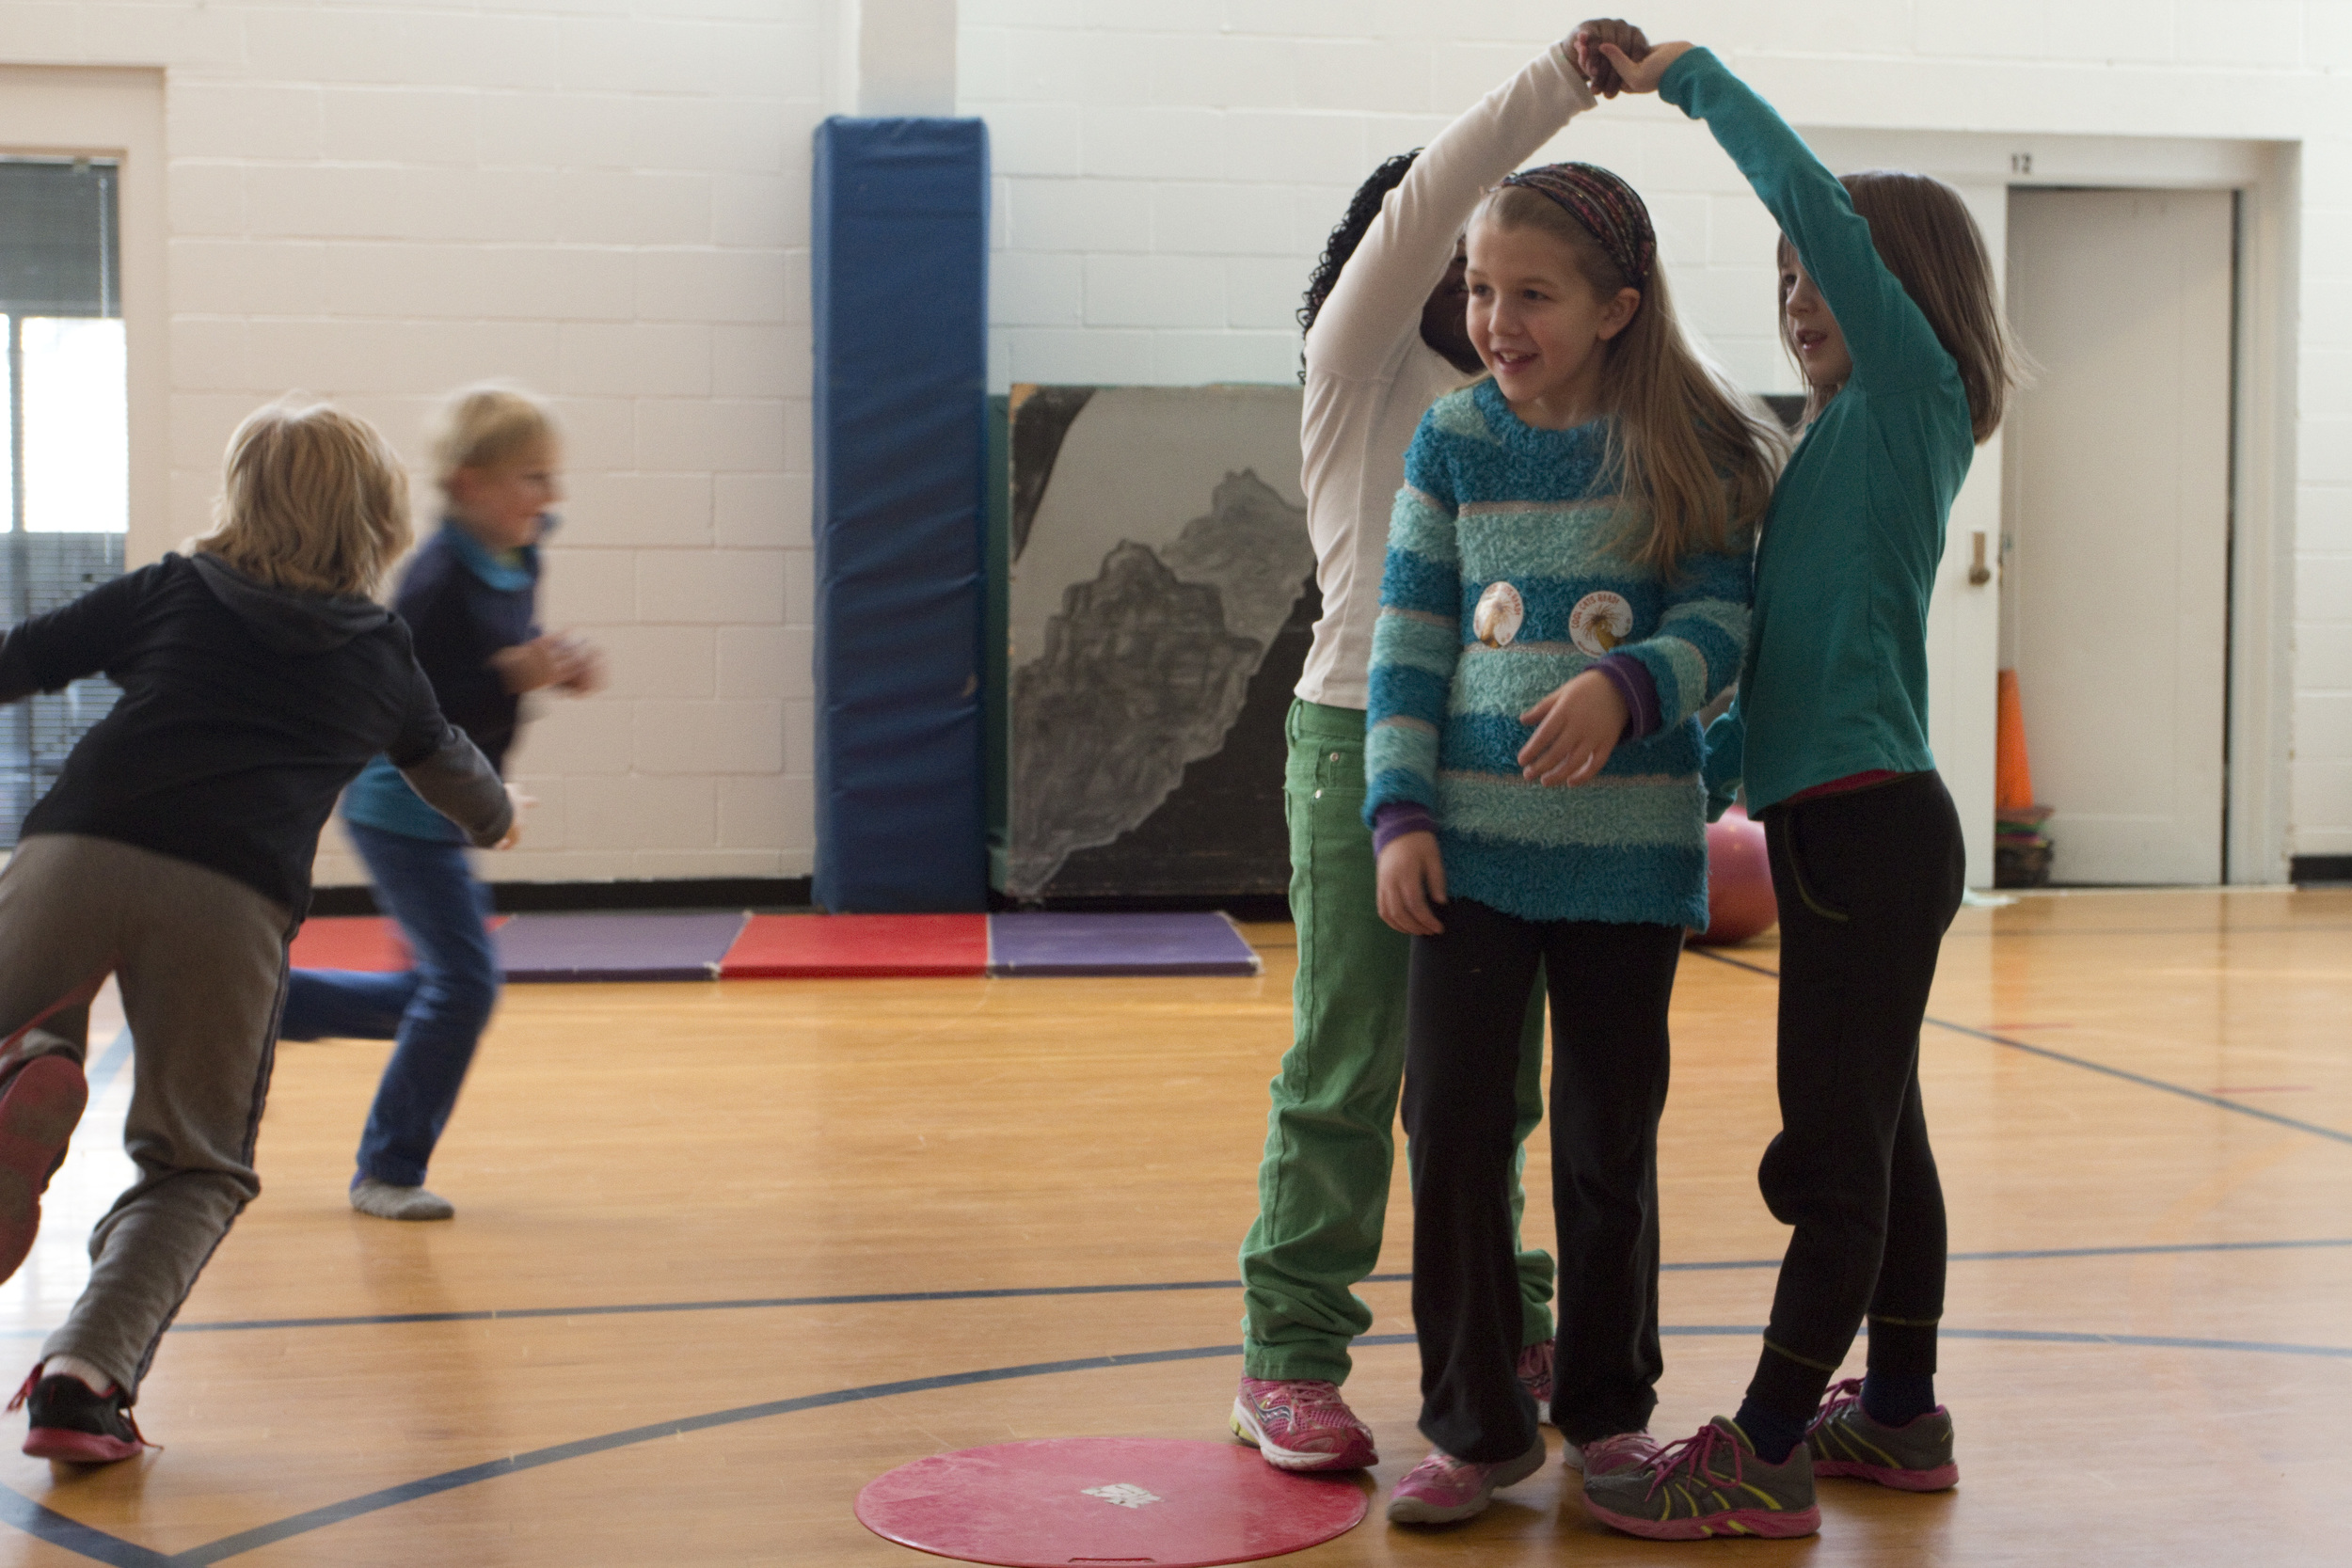  Student’s play 'squirrel get your tree' tag game. This game incorporates children's imagination with movement. During gym class, Kim McKeon strives to help children discover their own personal connection to active movement – whether that is through 